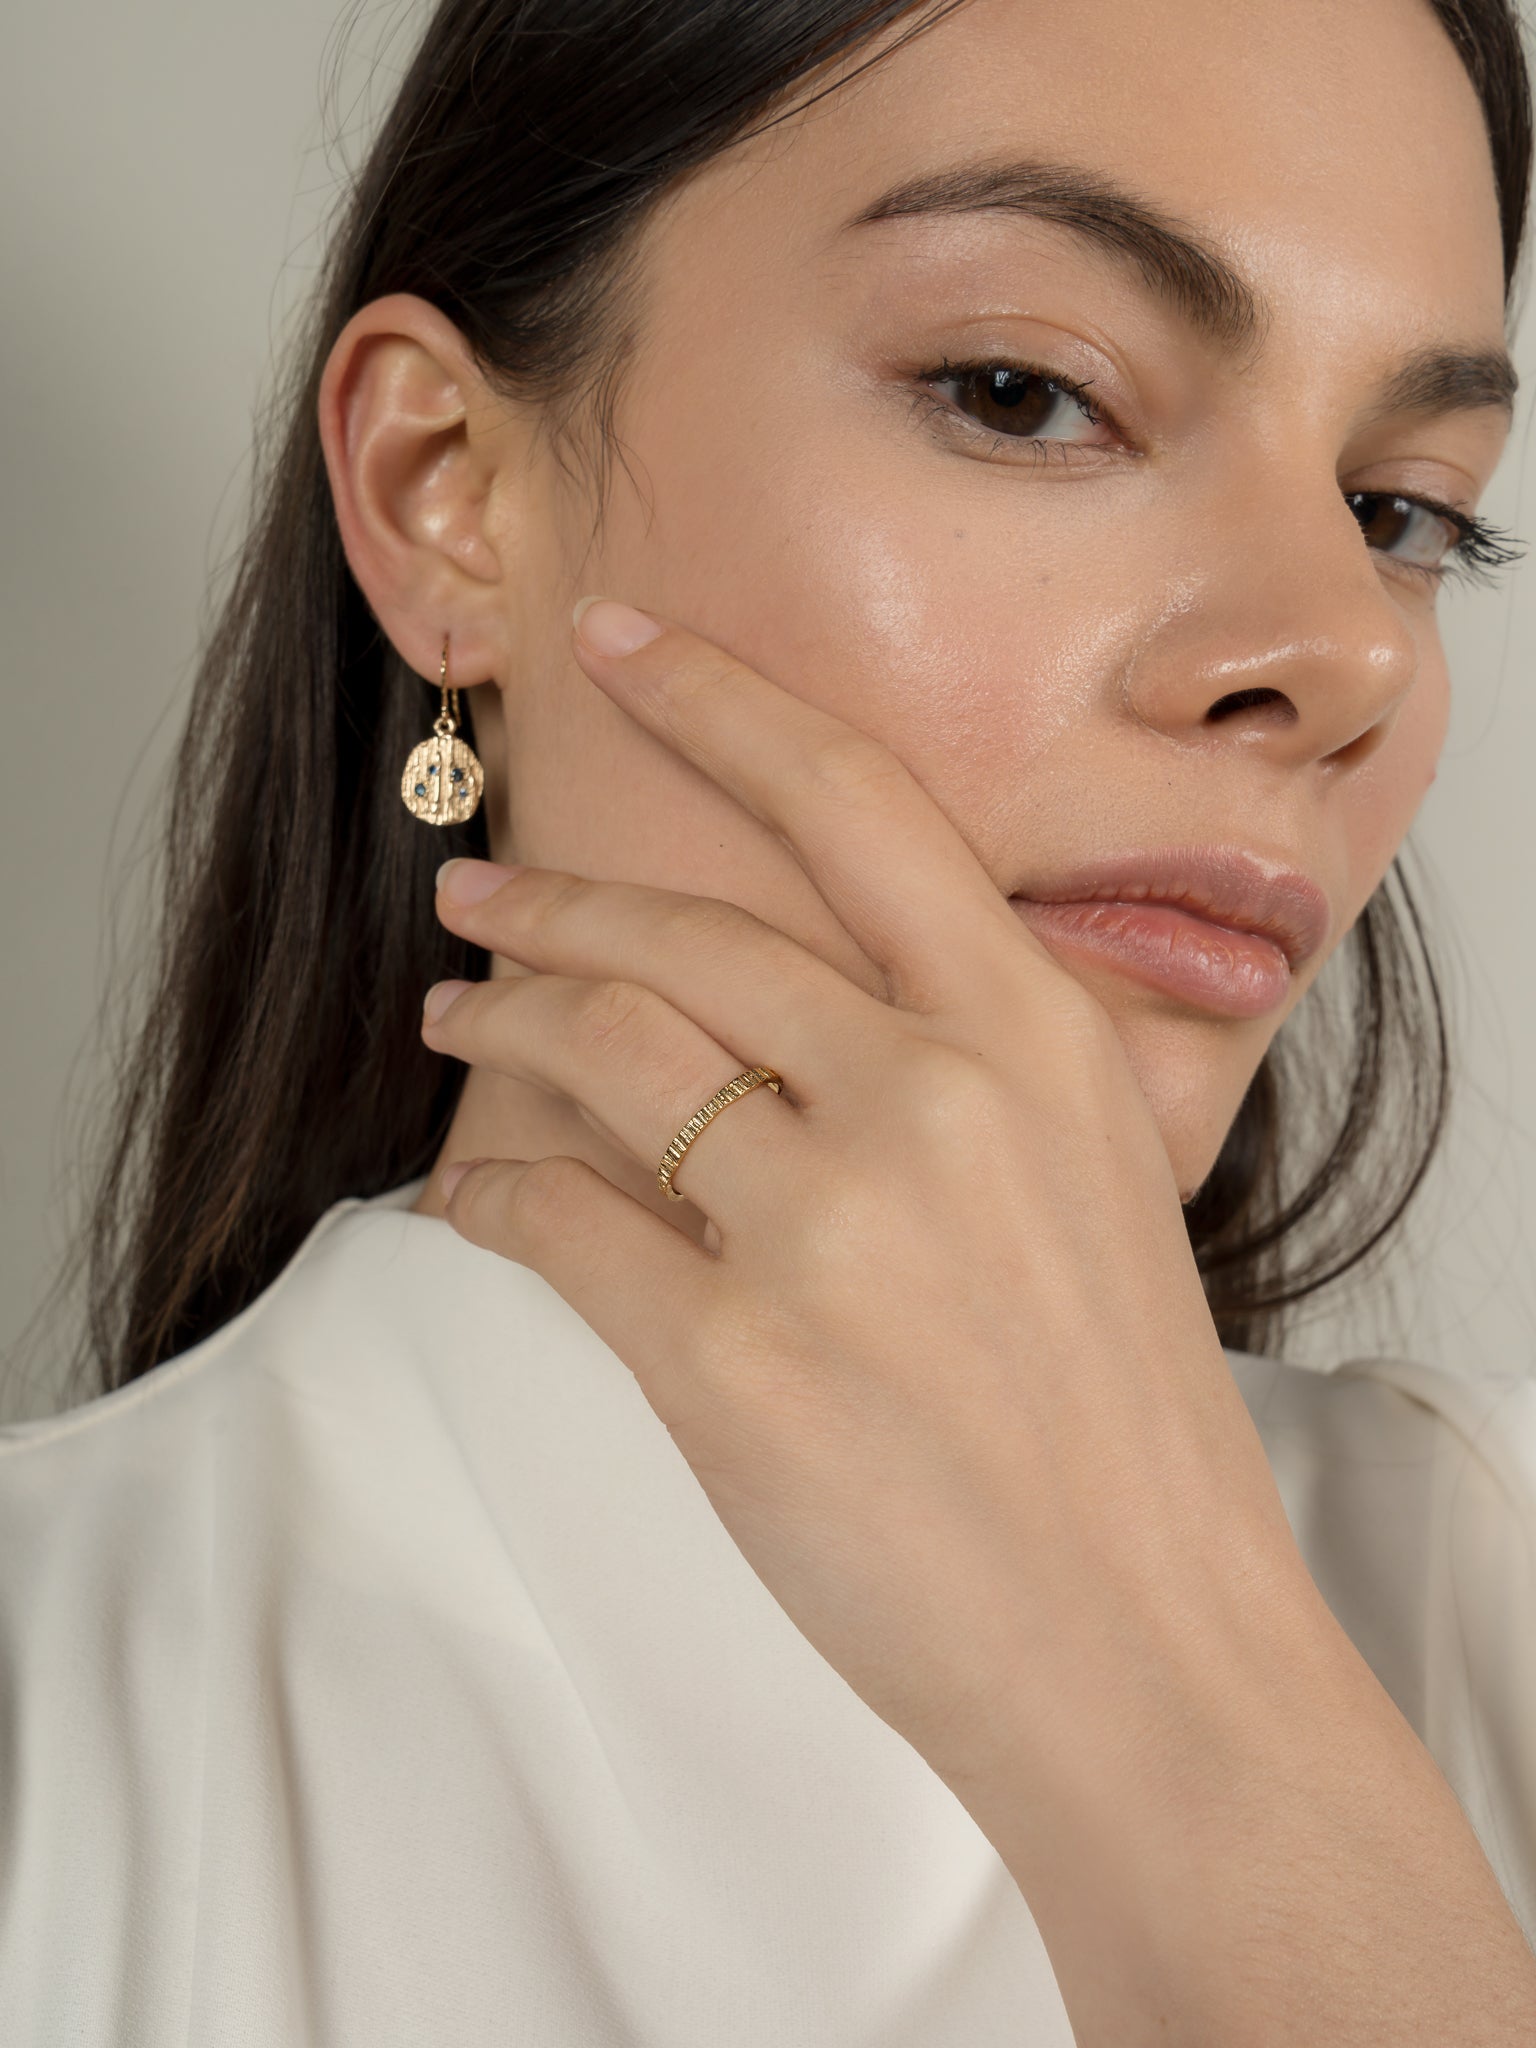 Model wearing earrings with sapphires and also wearing a ring handmade by eily o connell